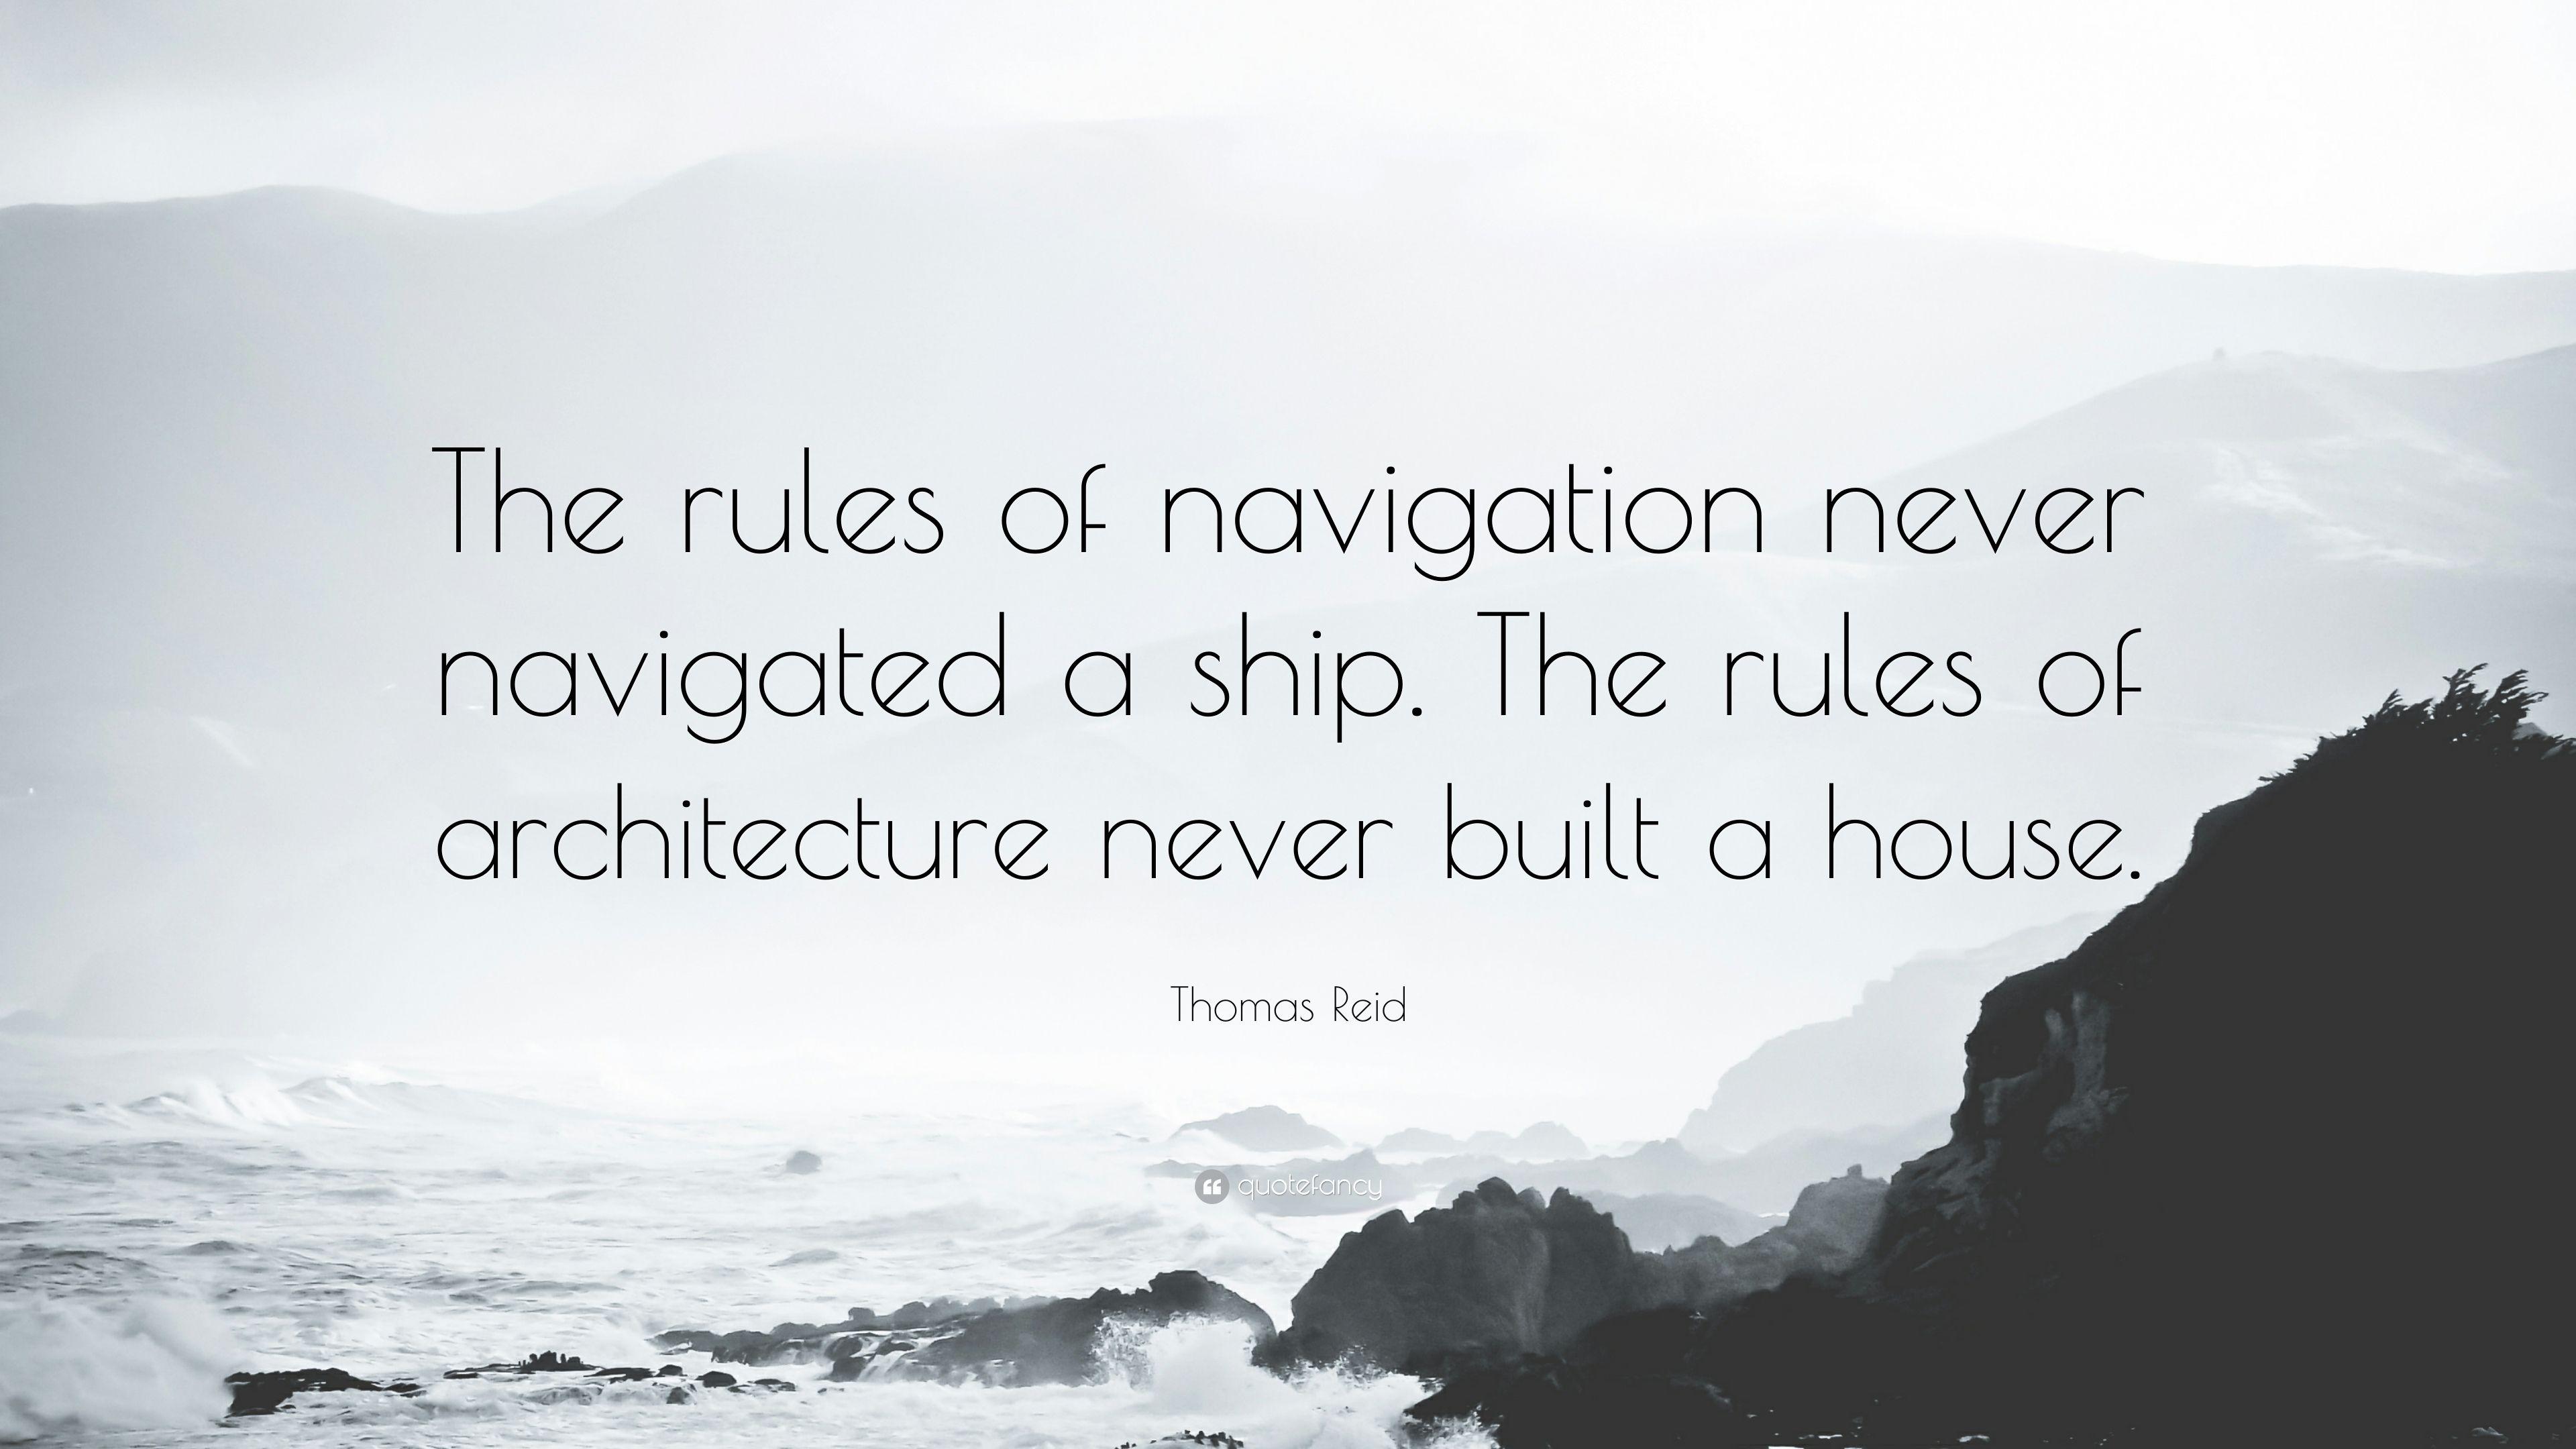 Thomas Reid Quote: “The rules of navigation never navigated a ship